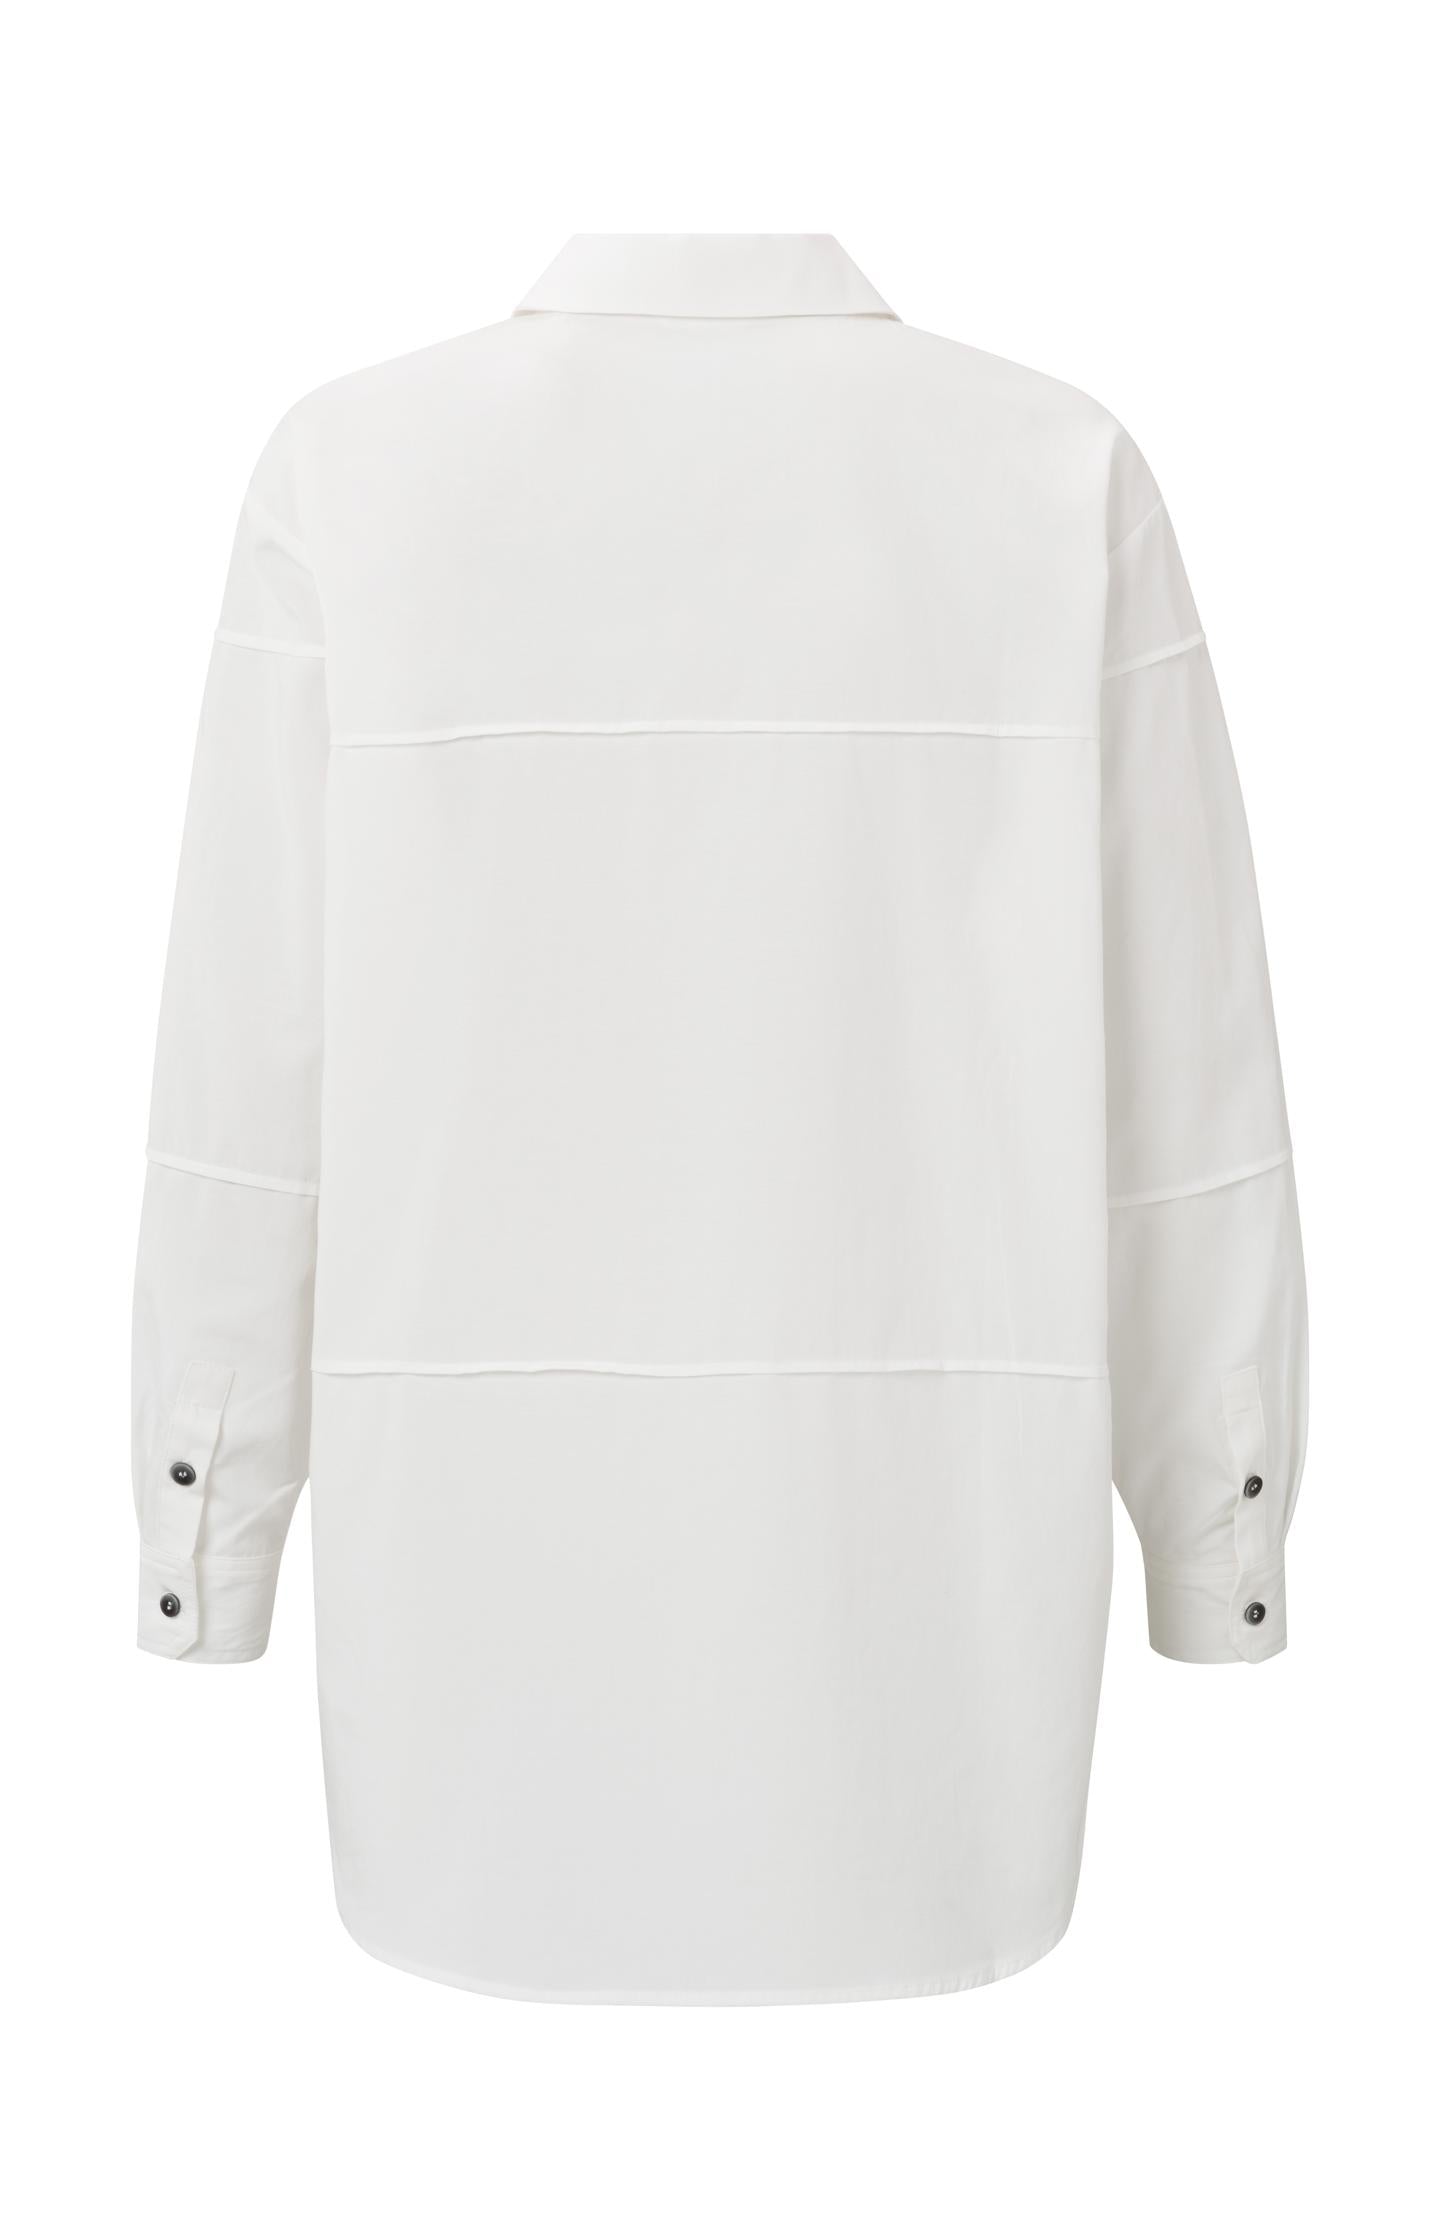 Oversized blouse with long sleeves, buttons and seam details